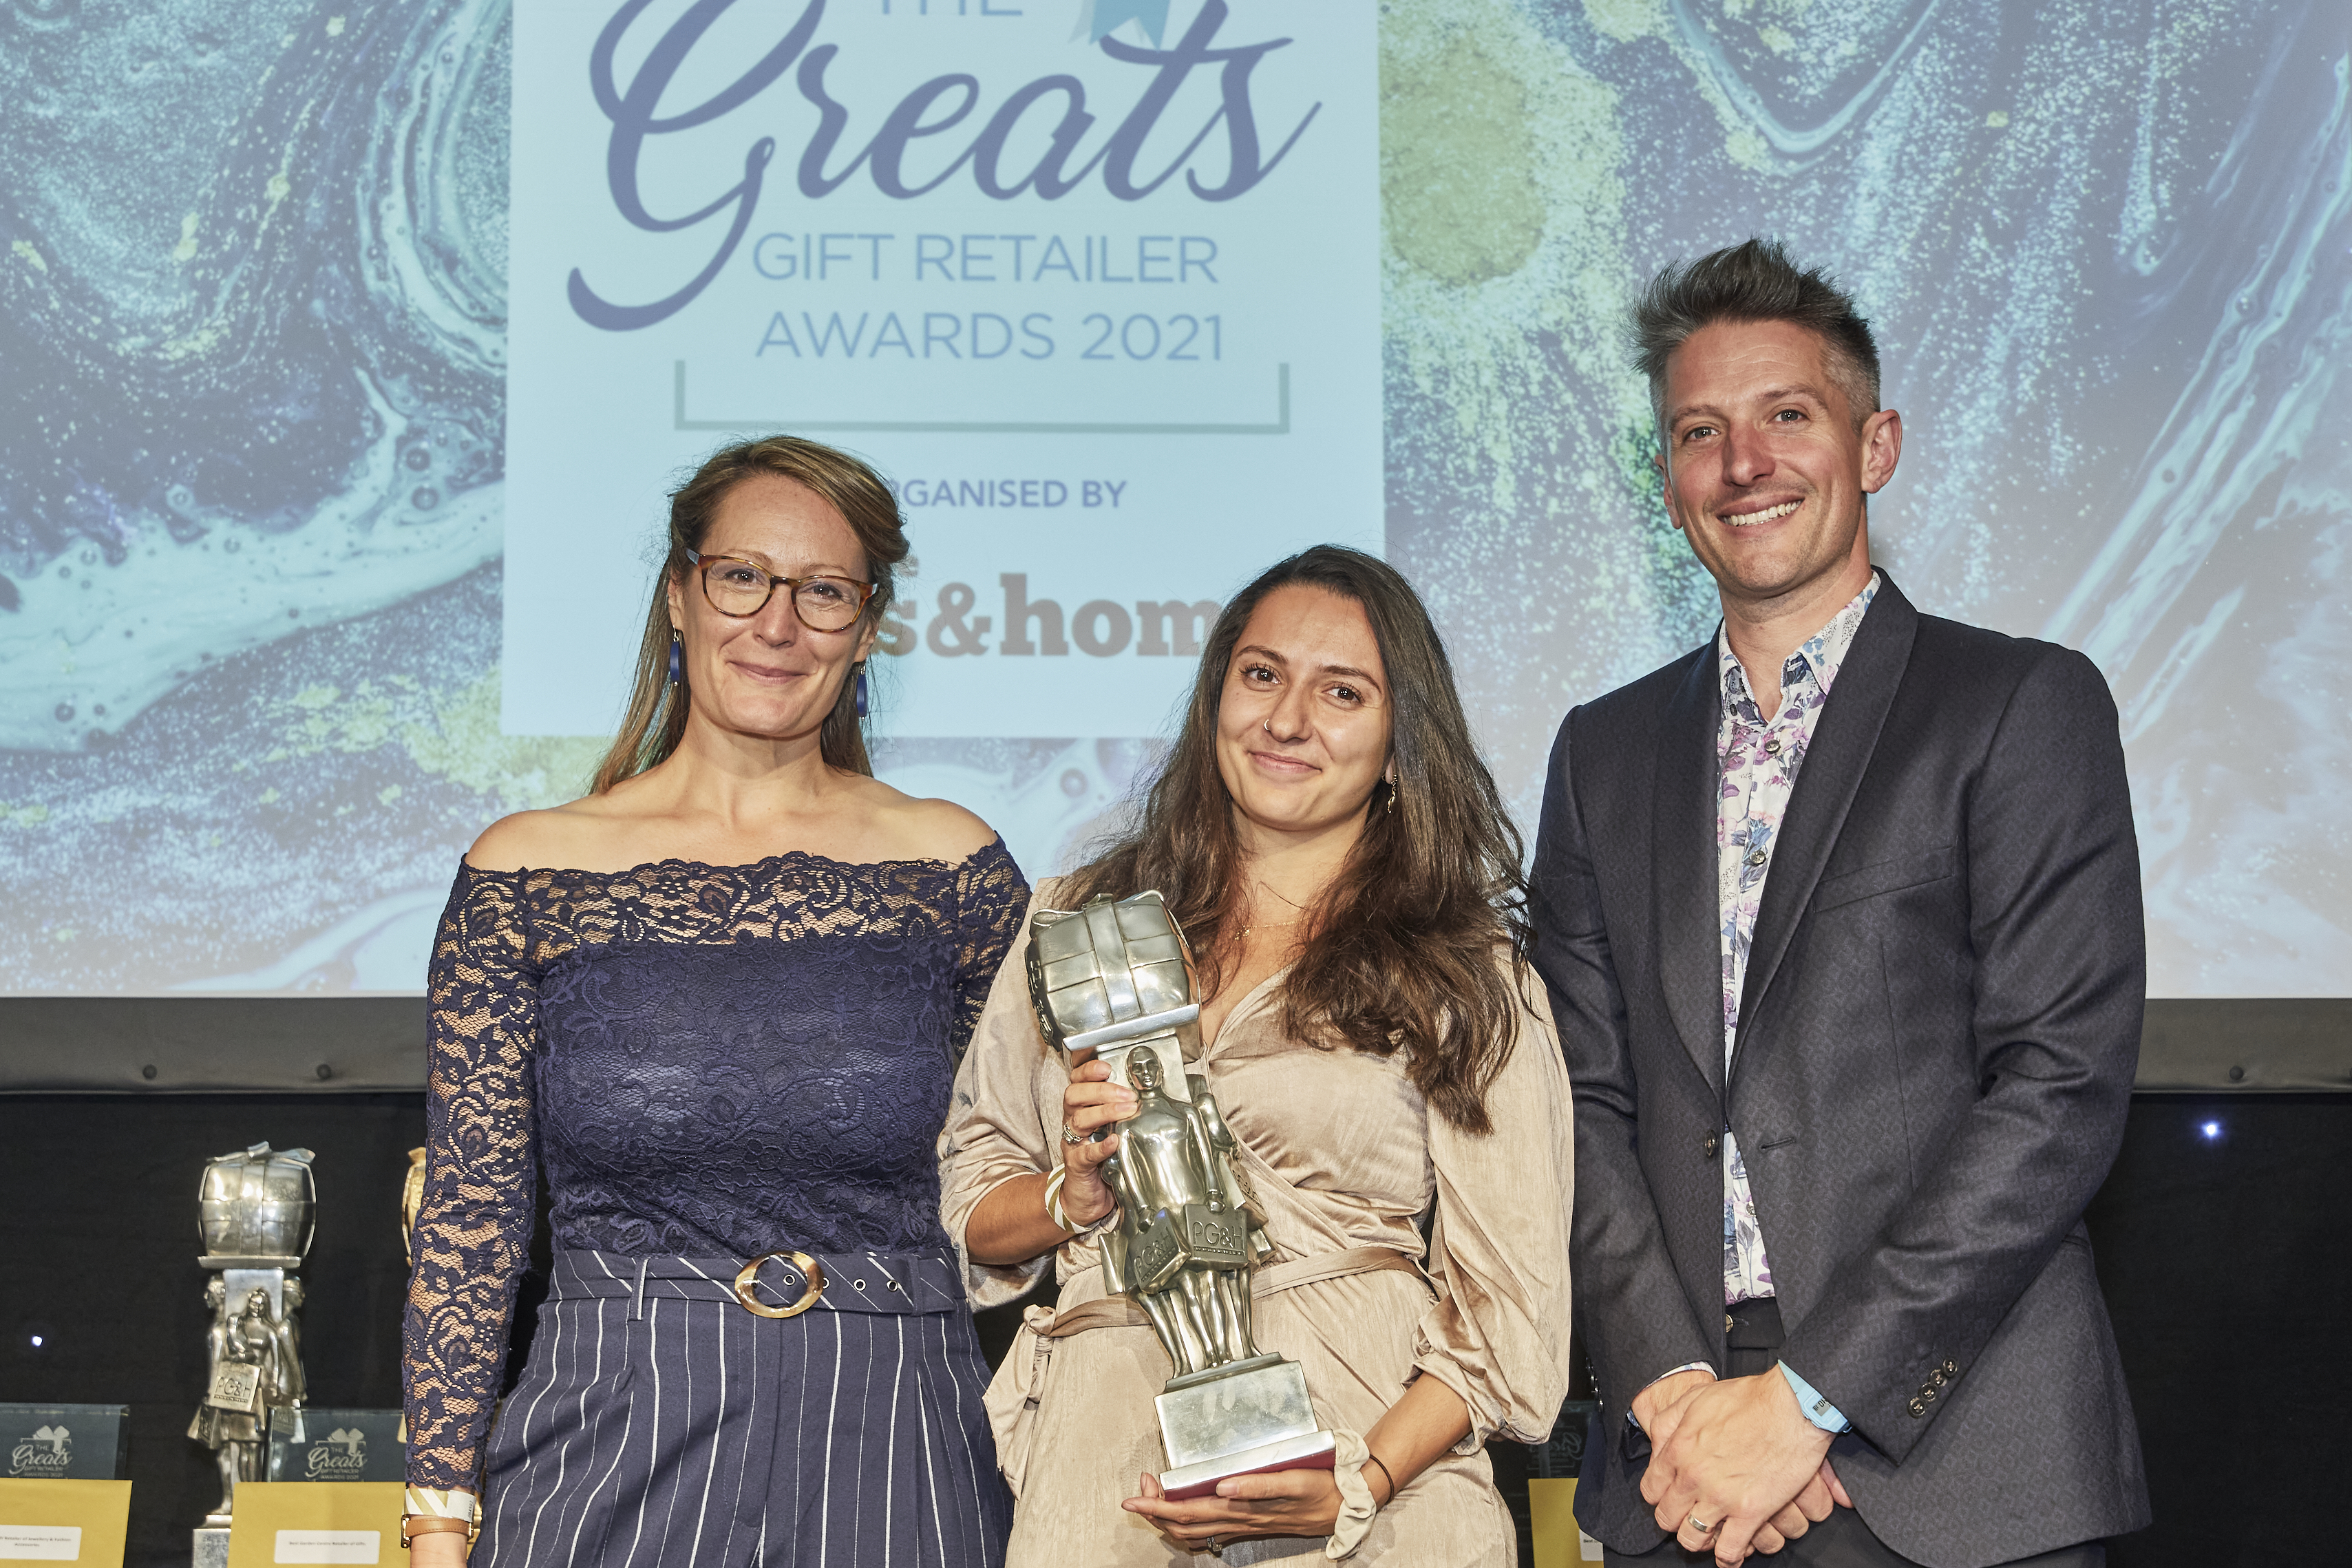 Above: Priya Aurora-Crowe (centre) with The Greats trophy that was presented to her by Helena Mansell-Stopher, founder and ceo of Products of Change, sponsor of the award category. Stuart Goldsmith, host of the event is also pictured.